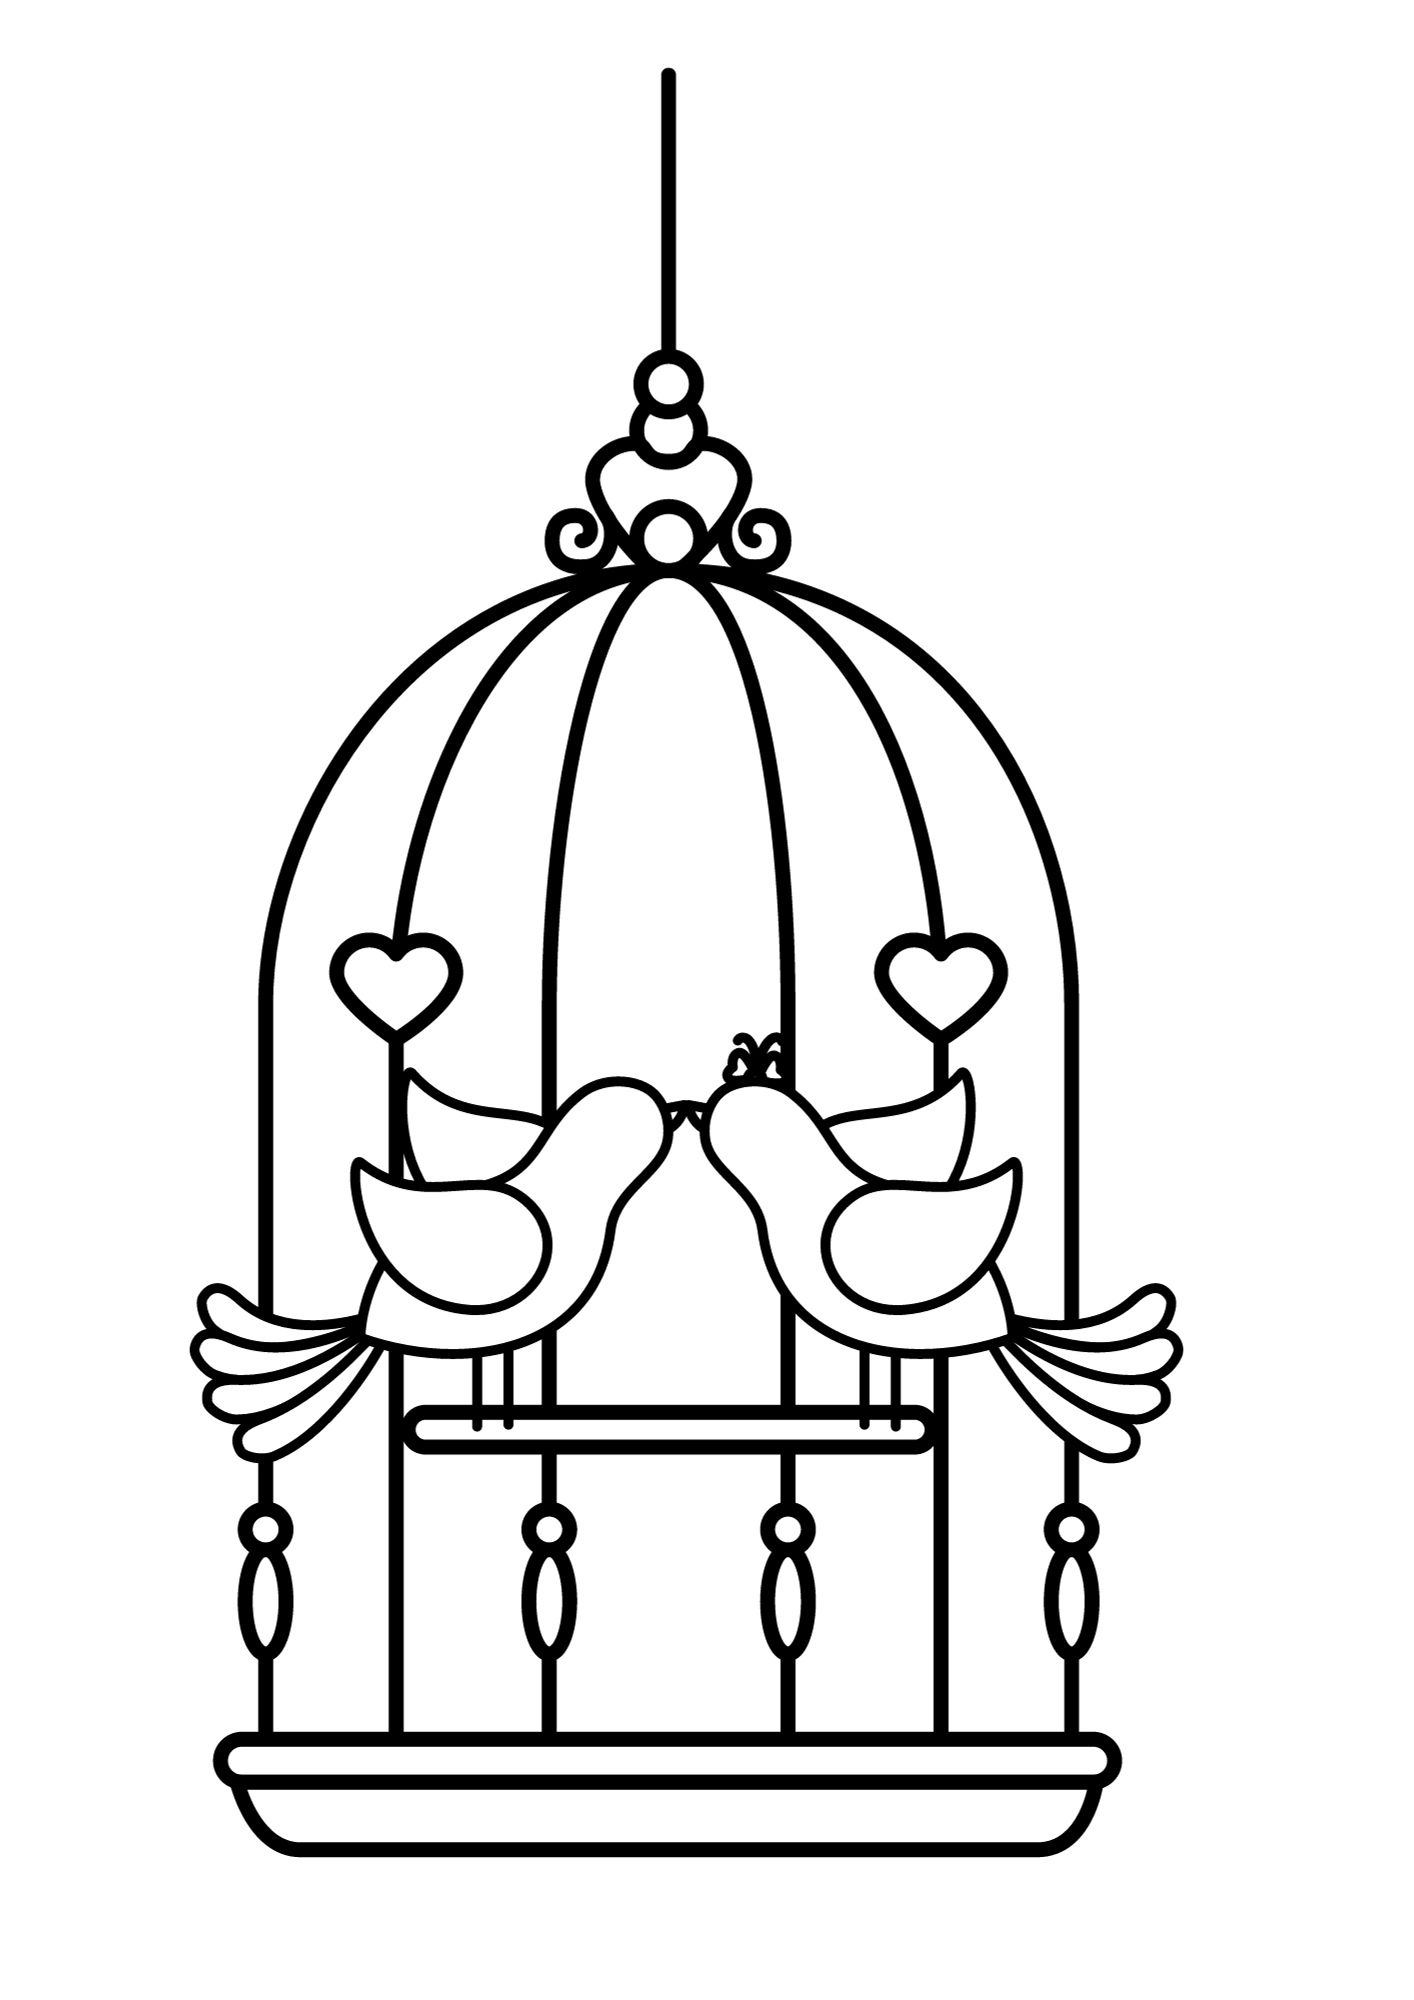 Dover Sampler Coloring Pages